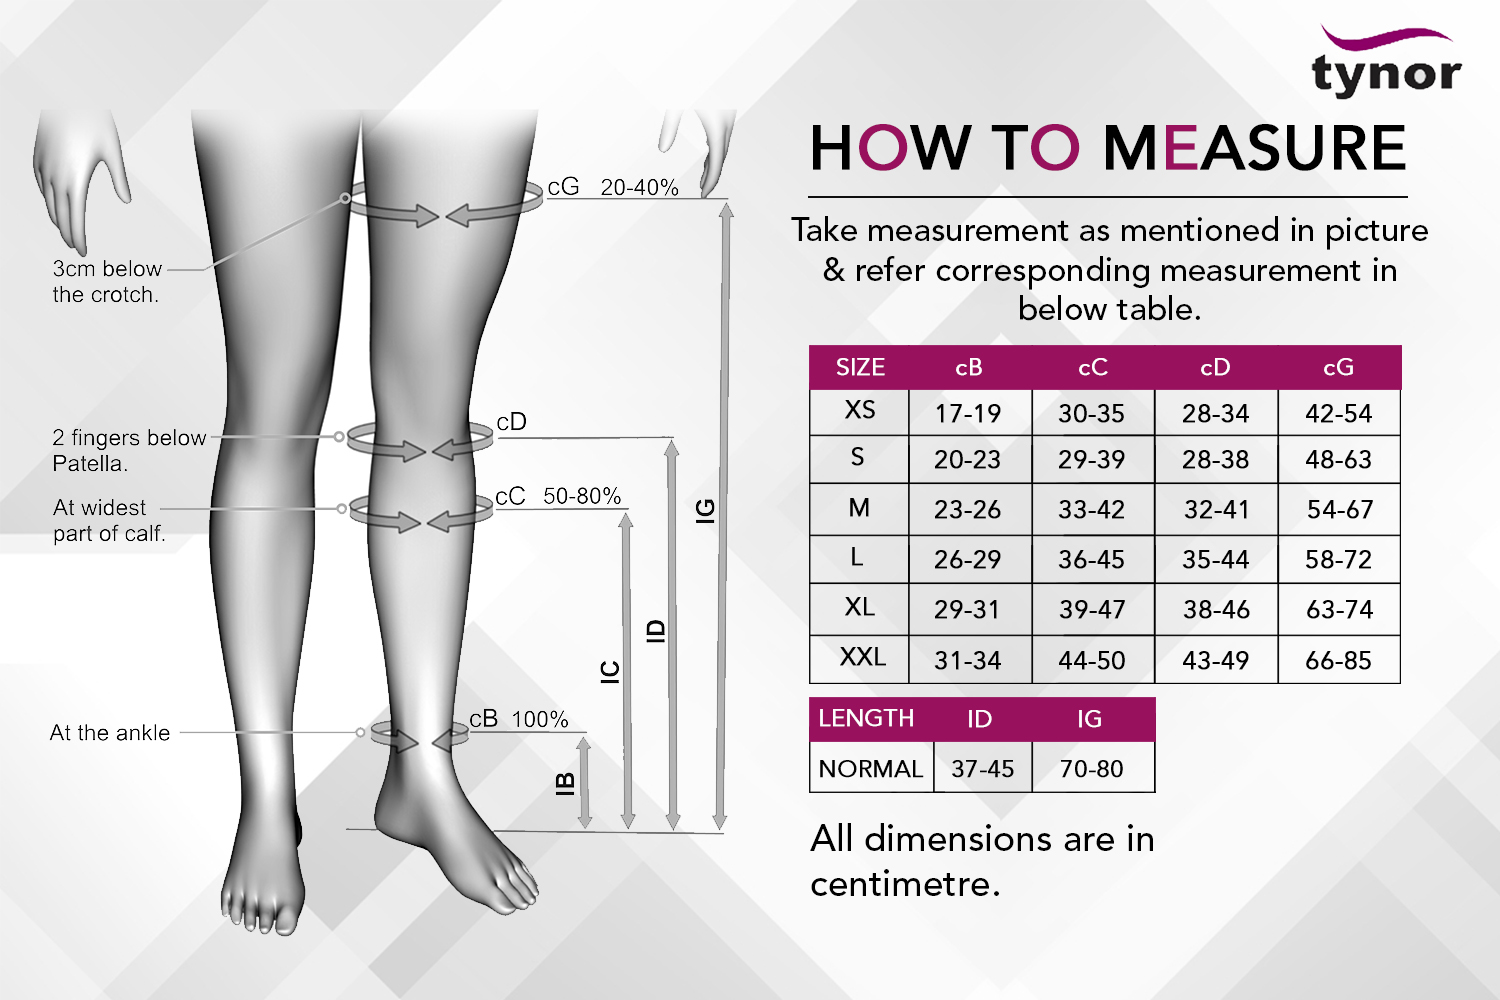 Size Chart For Women's Compression Socks